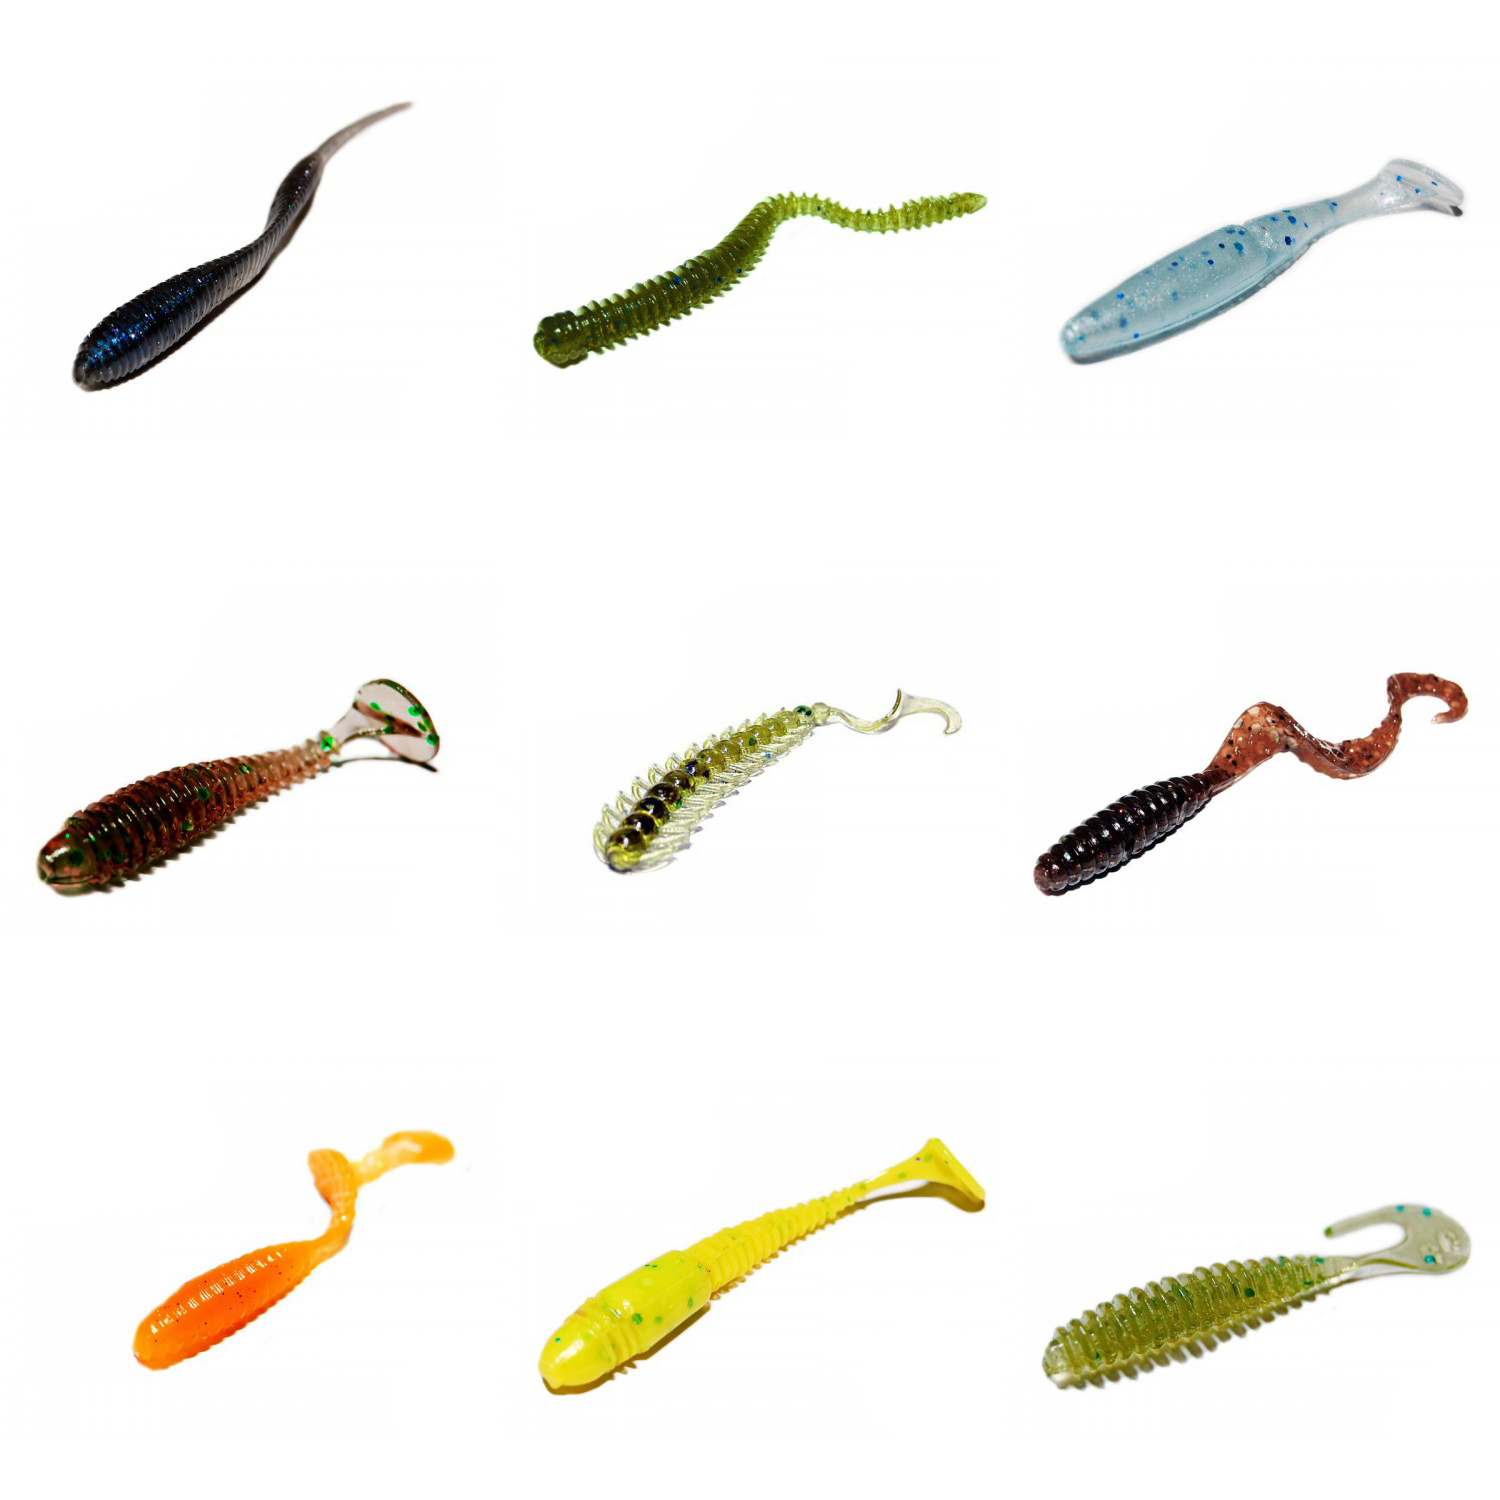 Fishing Worm Bait Molds Soft Plastic Lures Baits Tackle Lure Making ...